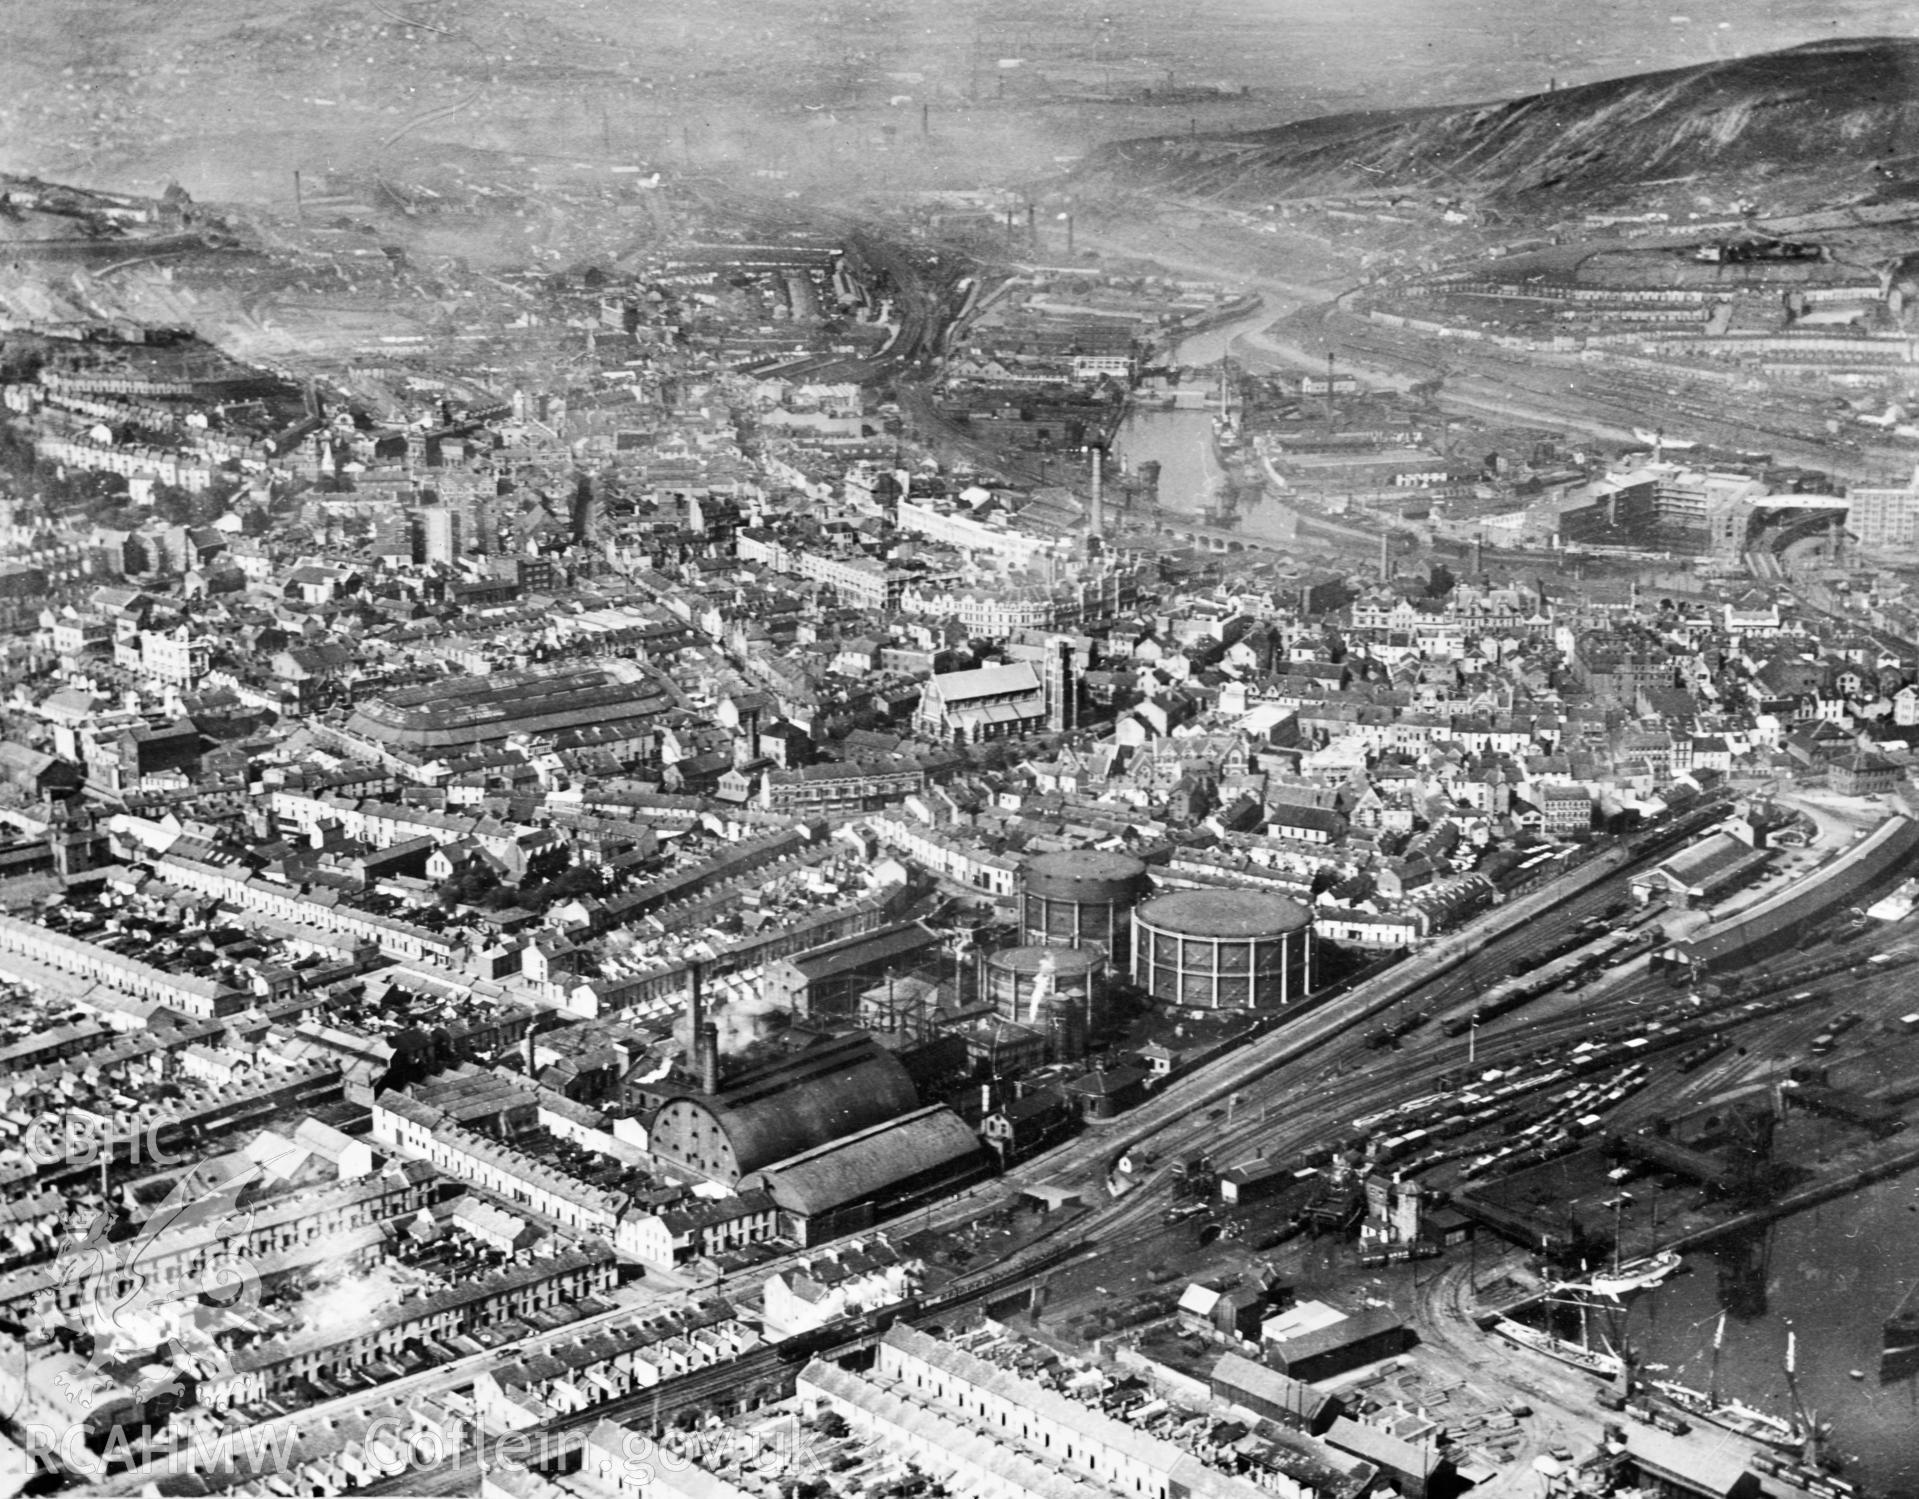 View of Swansea showing the gas works, Victoria Station and Weaver and Company's Flour Mills (distant right). Oblique aerial photograph, 5?x4? BW glass plate.